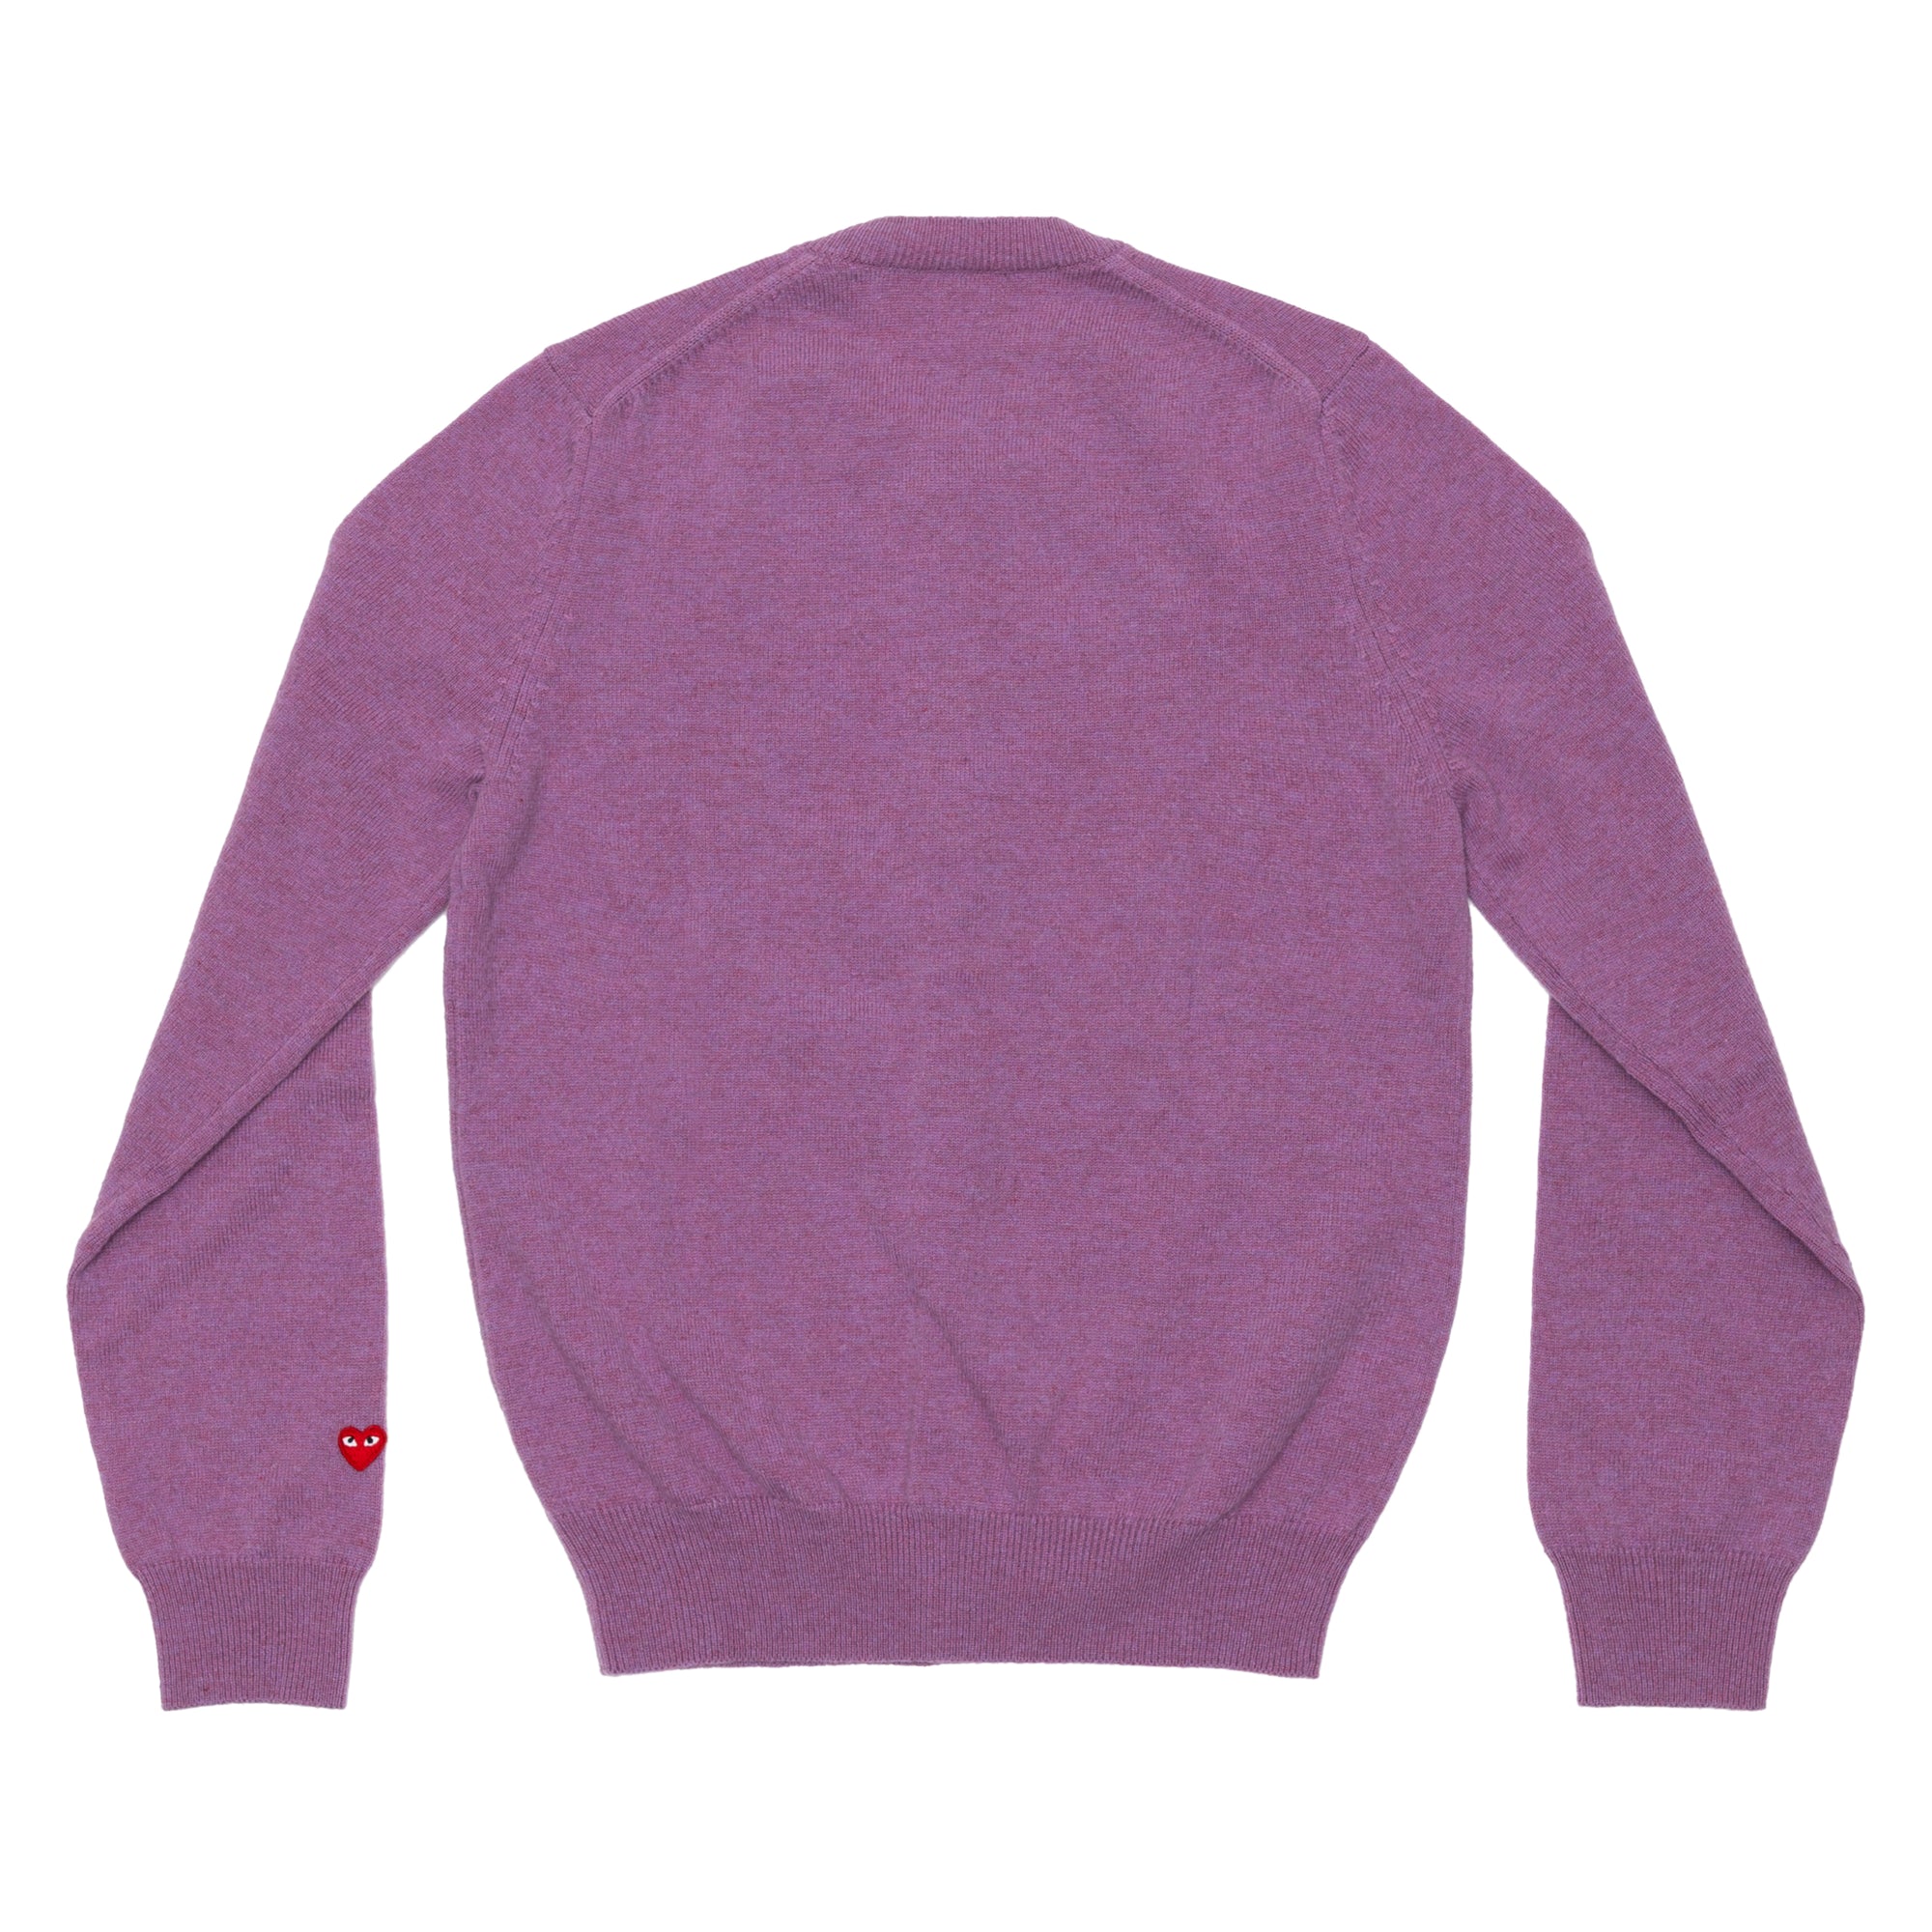 PLAY CDG  - Top Dyed Carded Lambswool Women's Cardigan - (Purple) view 2